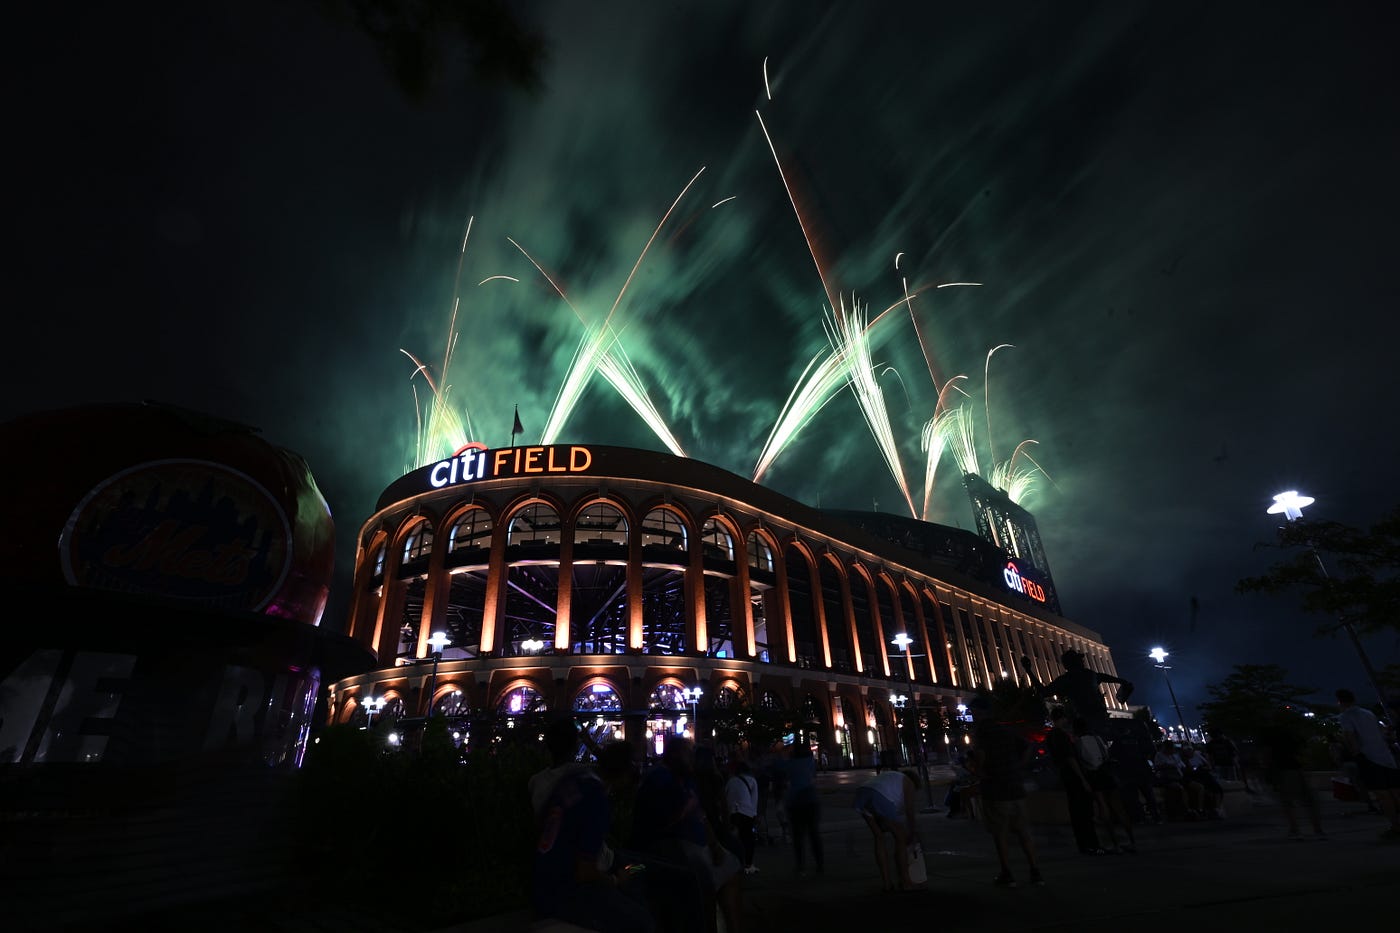 On Deck This Homestand: August 7–16, by New York Mets